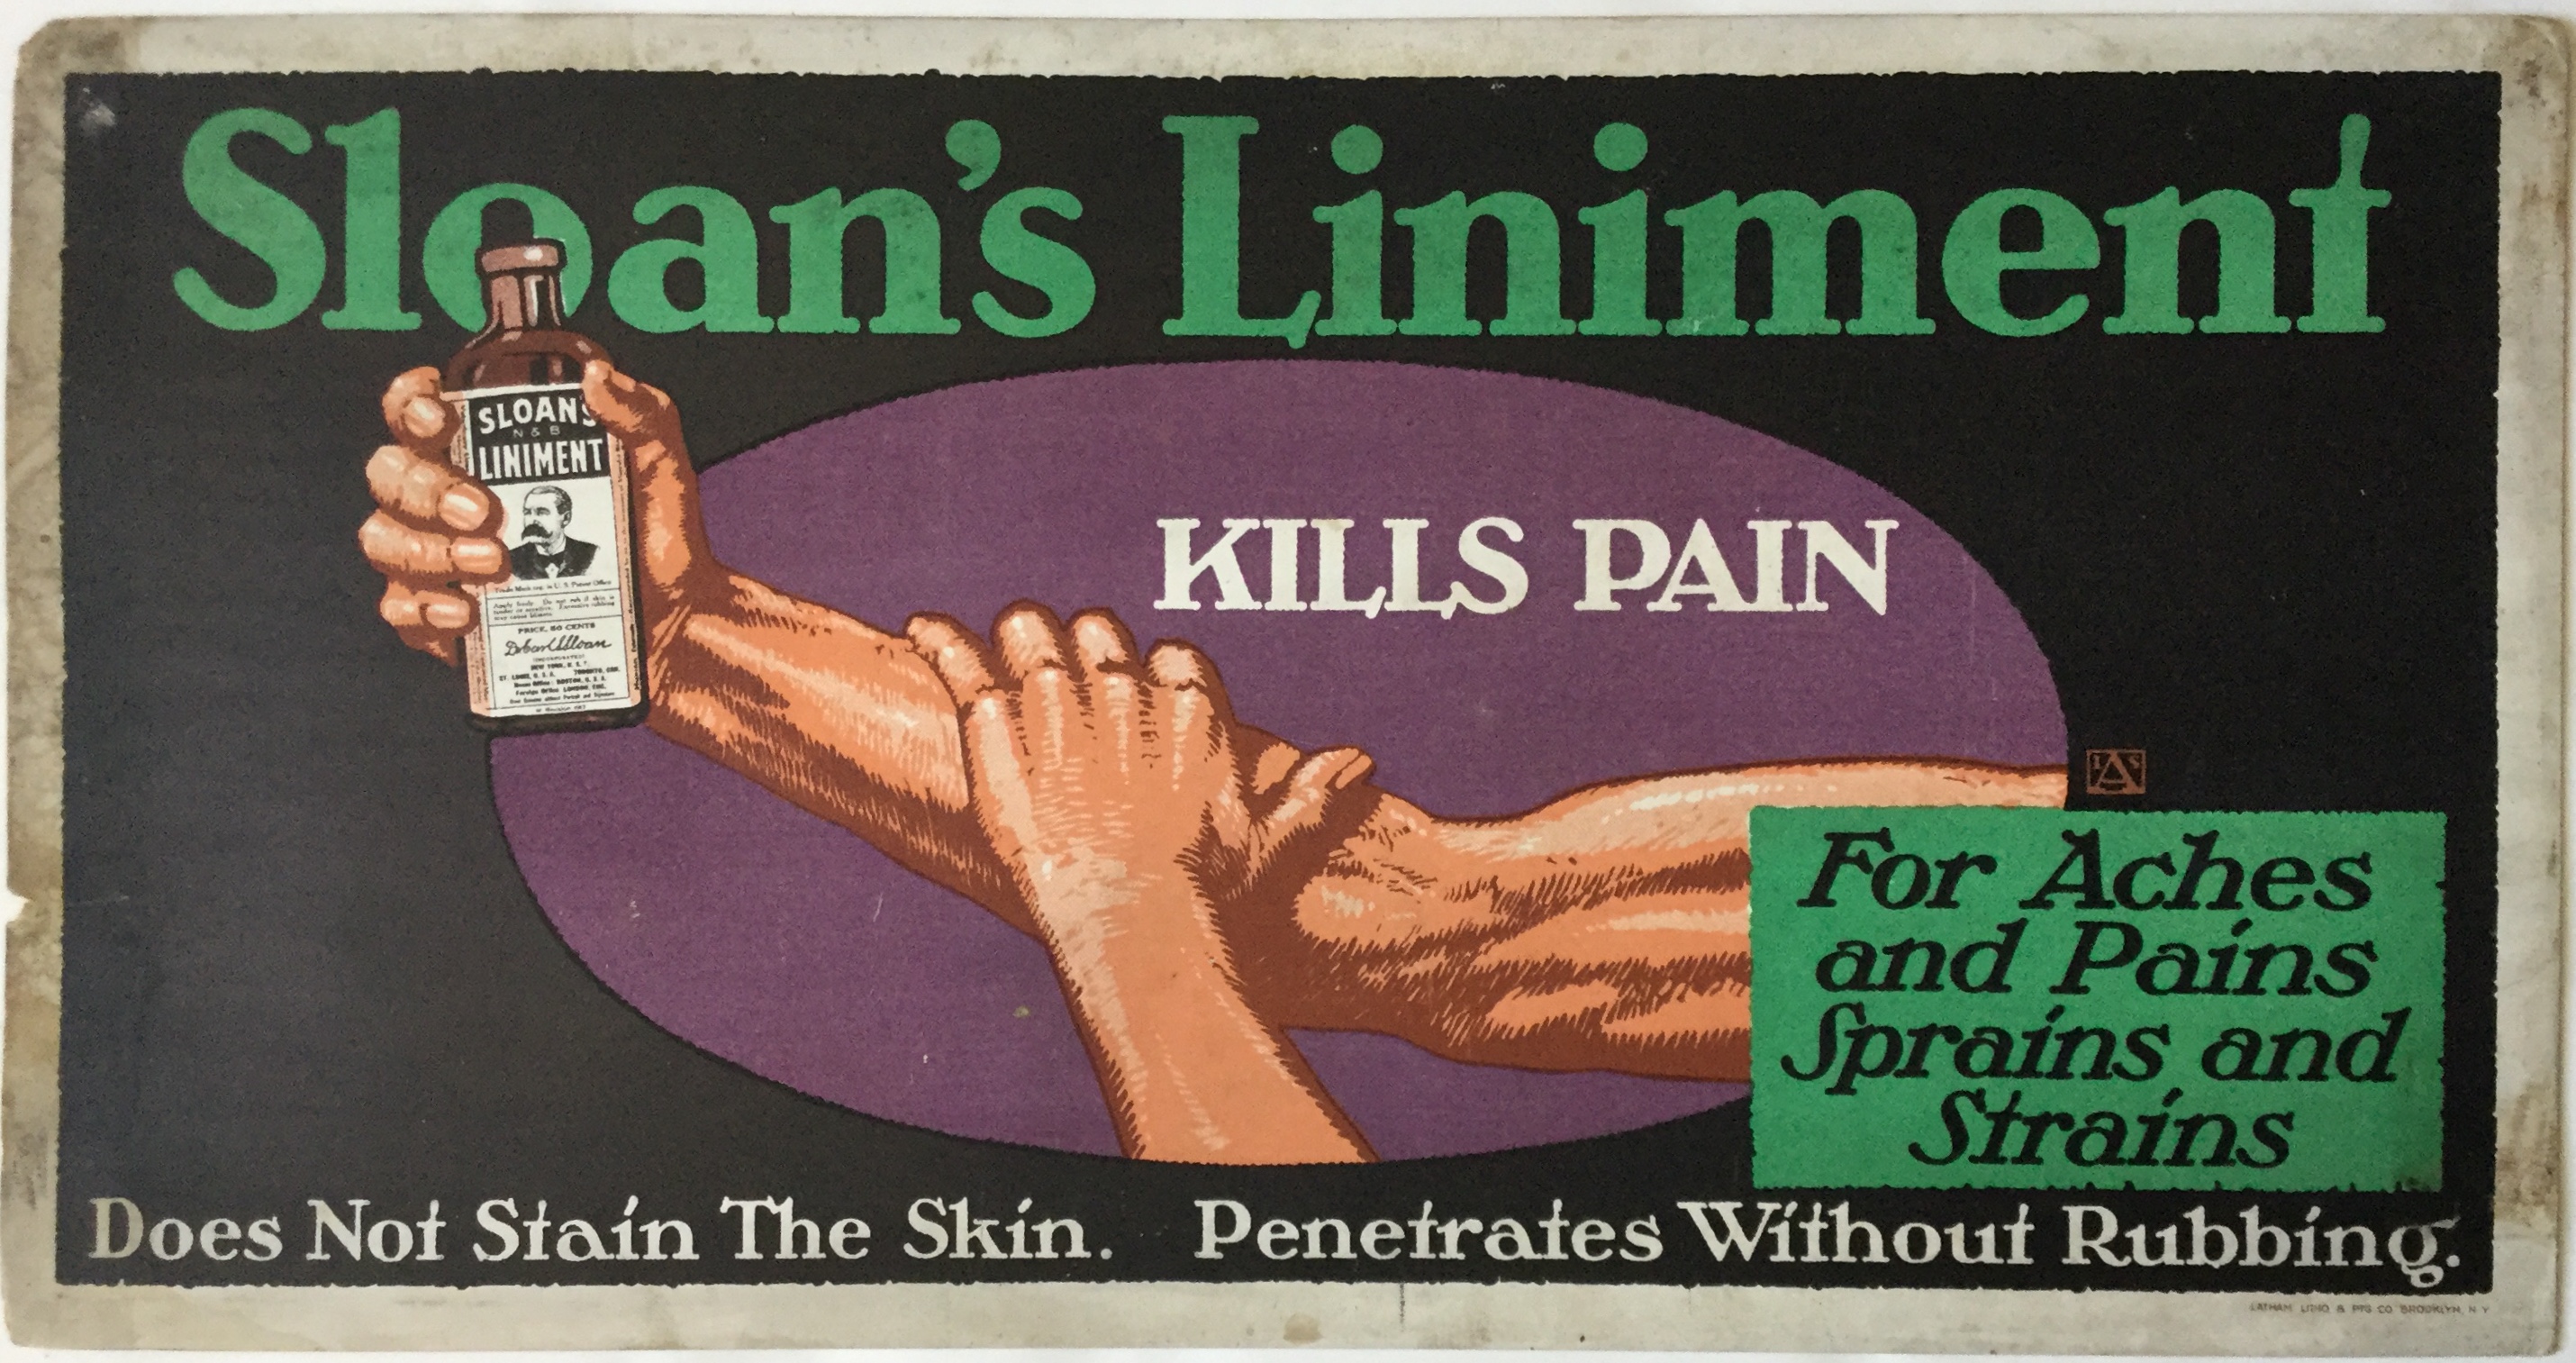 J399	SLOAN’S LINIMENT KILLS PAIN - FOR ACHES AND PAINS, SPRAINS AND STRAINS.